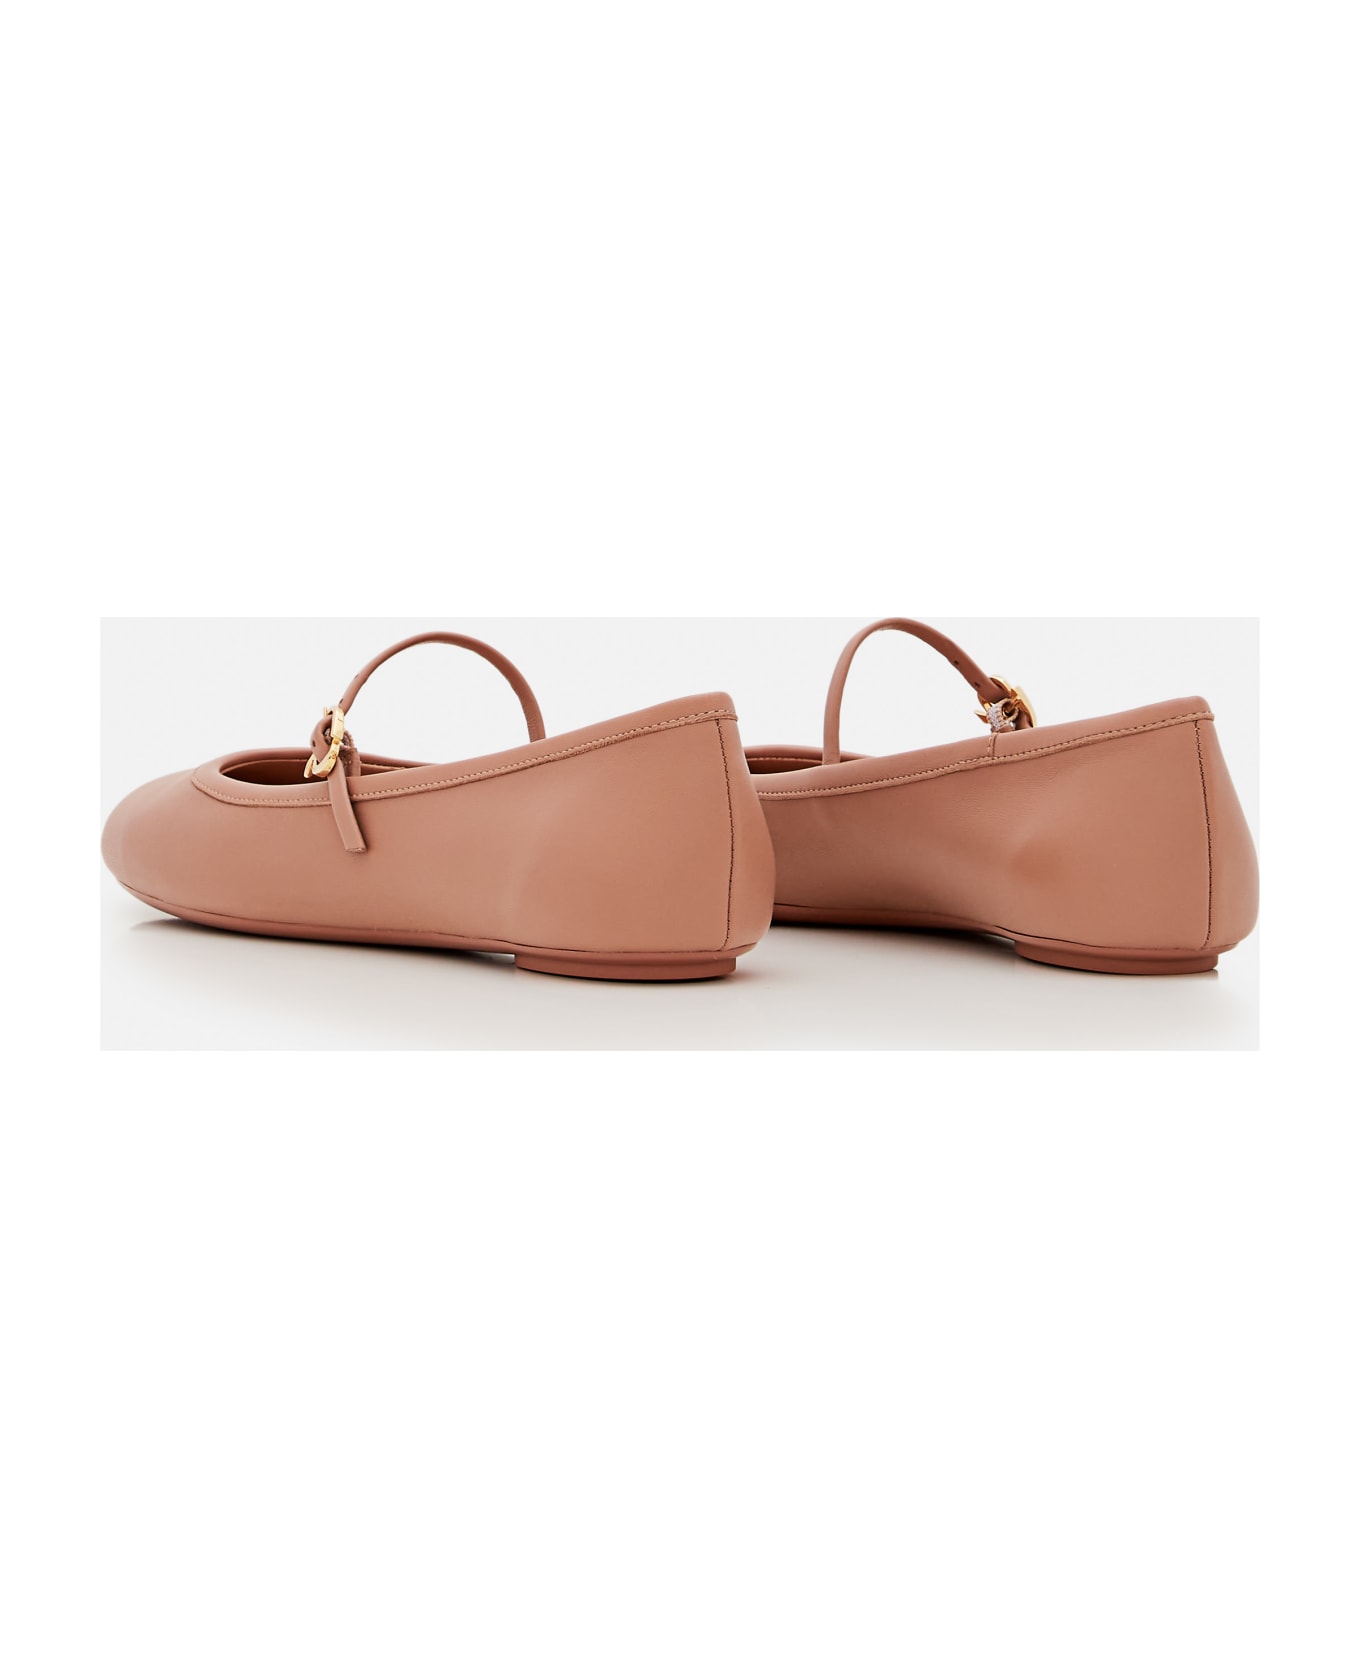 Gianvito Rossi Leather Ballet Flat - Pink フラットシューズ